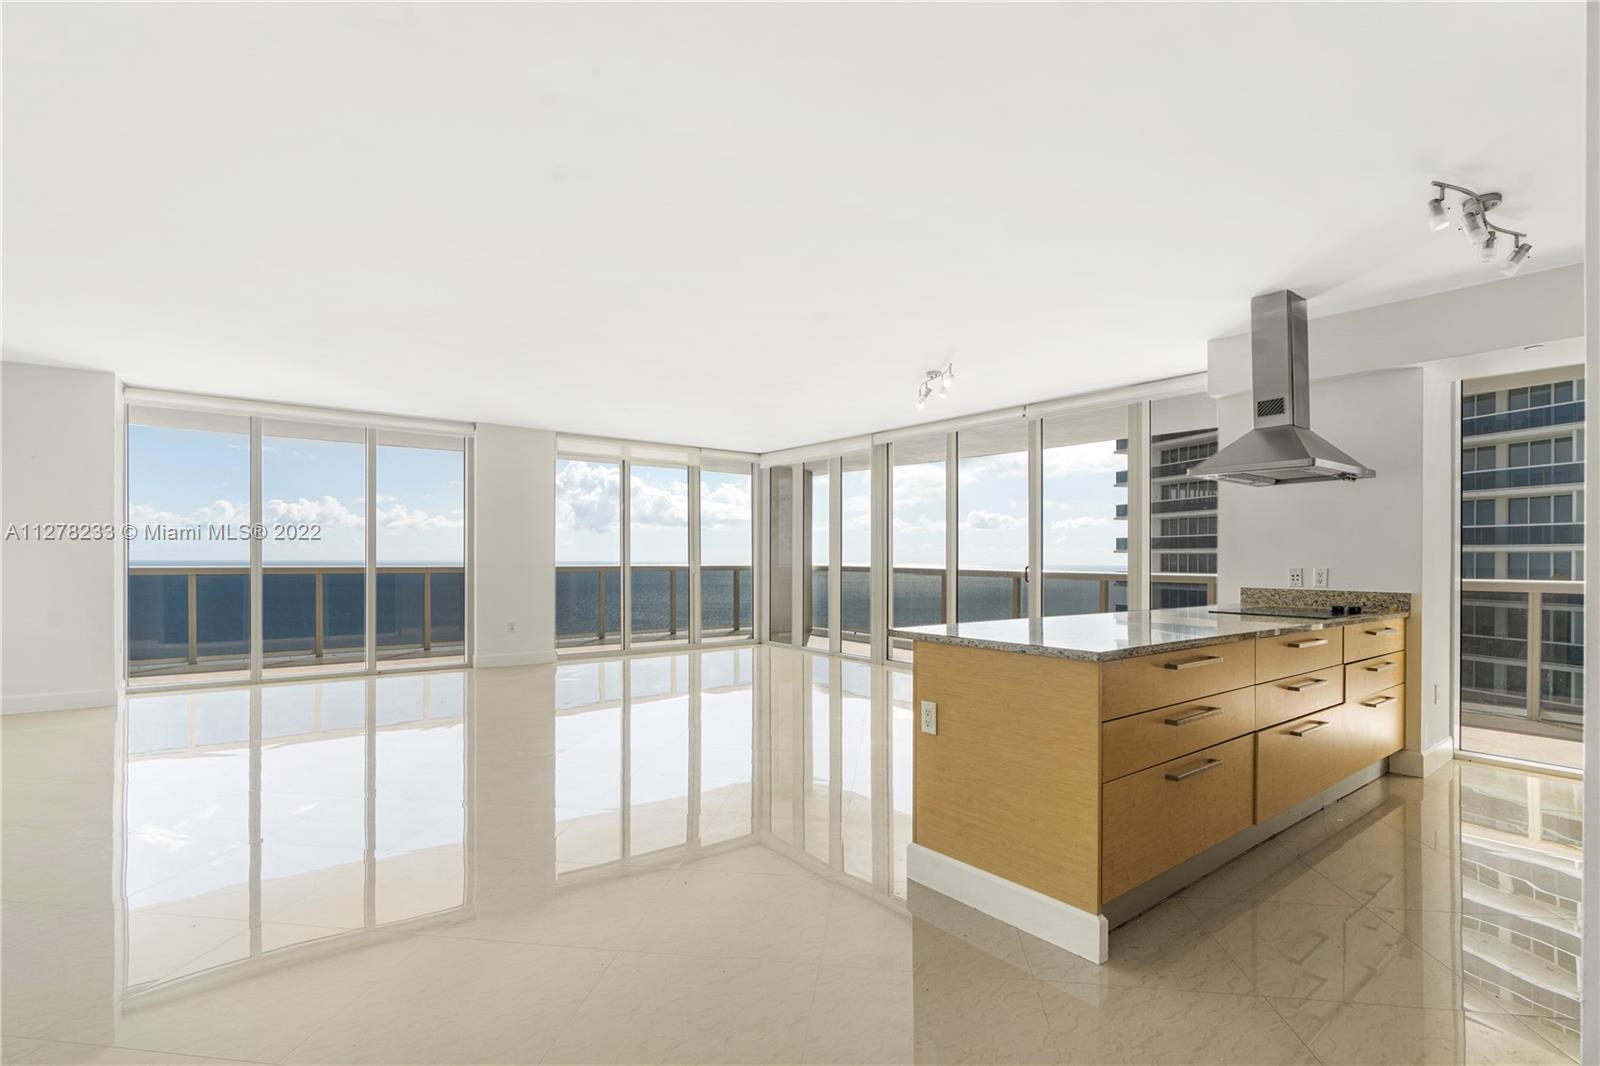 South East corner 3 bed 3.5 bath unit with spectacular direct Ocean views at The Beach Club 3. A spa